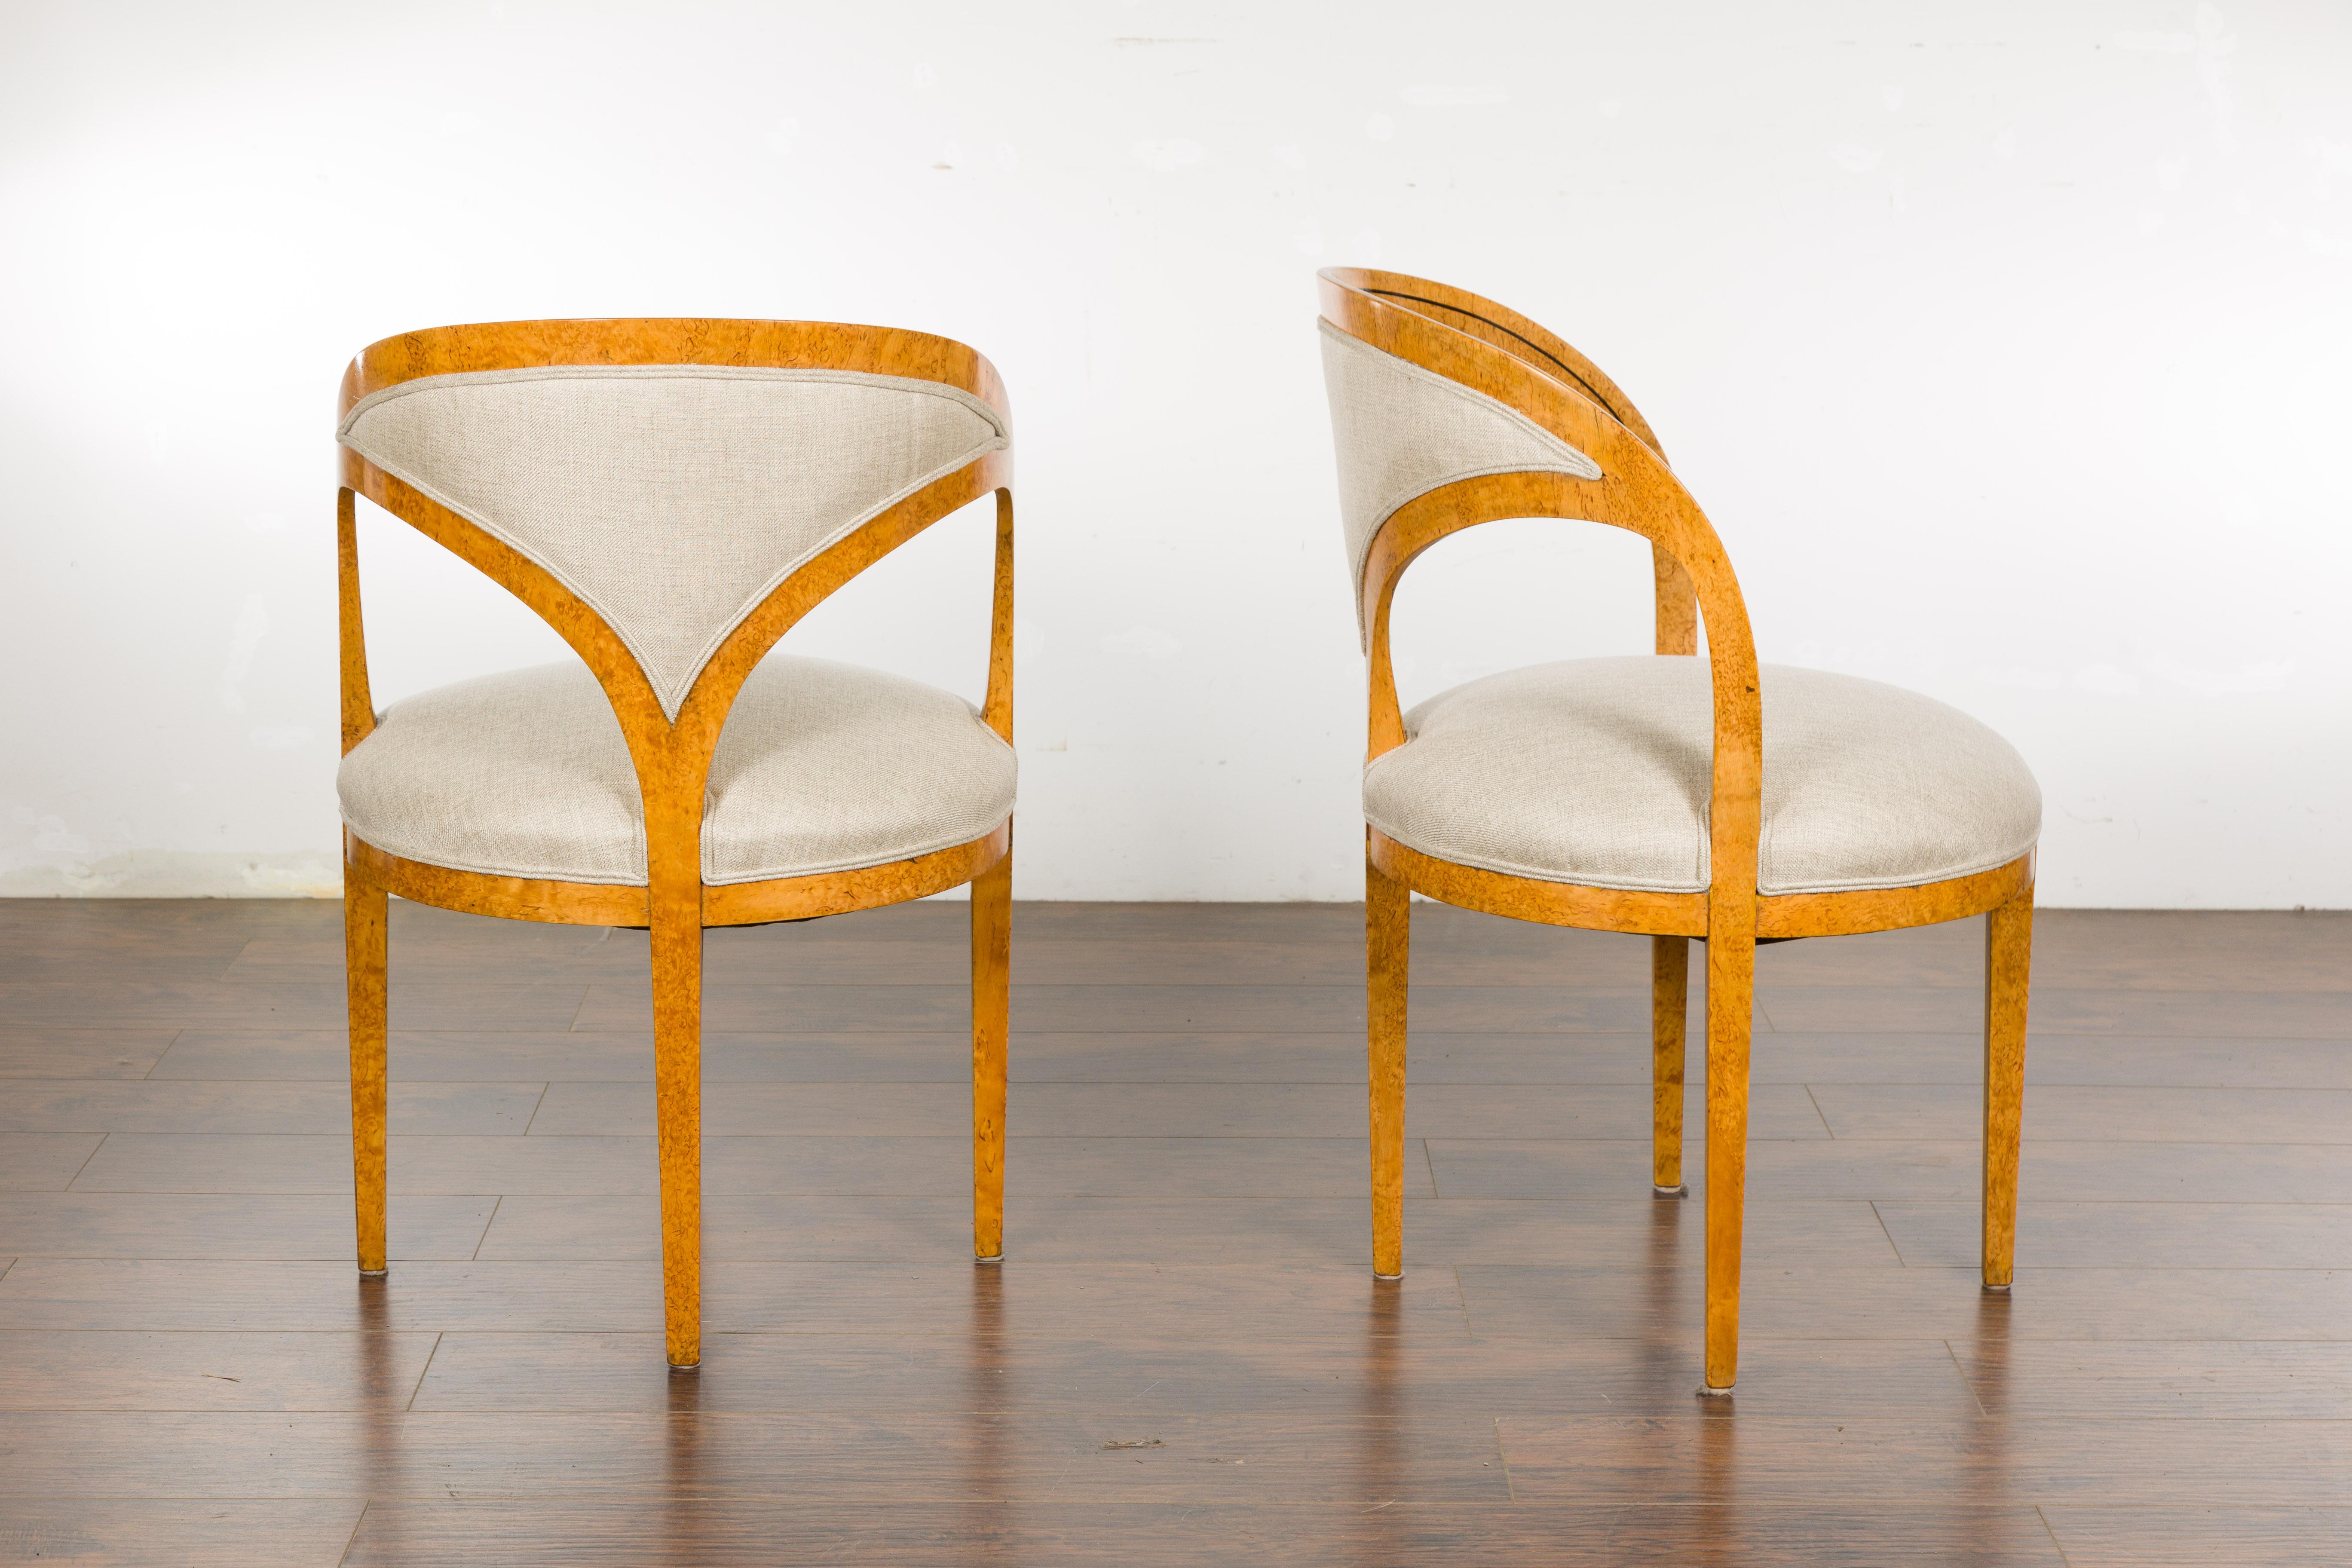 Biedermeier 19th Century Chairs with Ebonized Accents and New Upholstery, a Pair For Sale 9